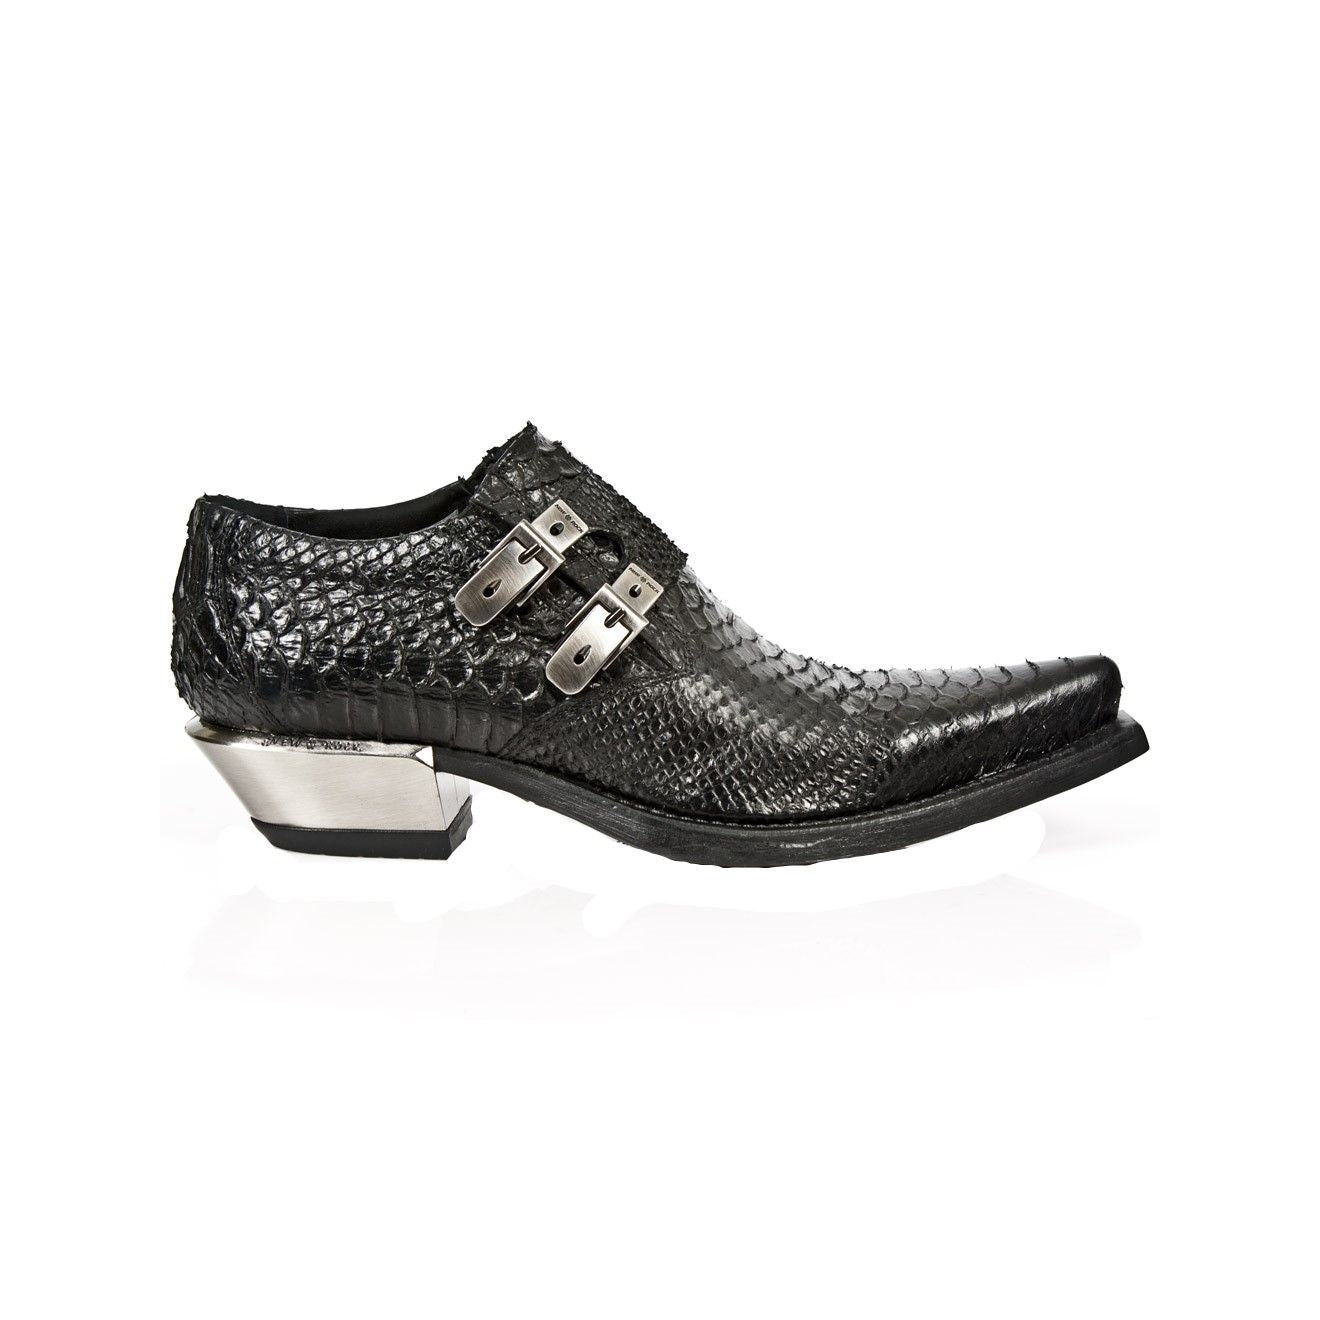 New Rock Embossed Python Black Leather Buckled Shoes-7934-S2 - Upperclass Fashions 